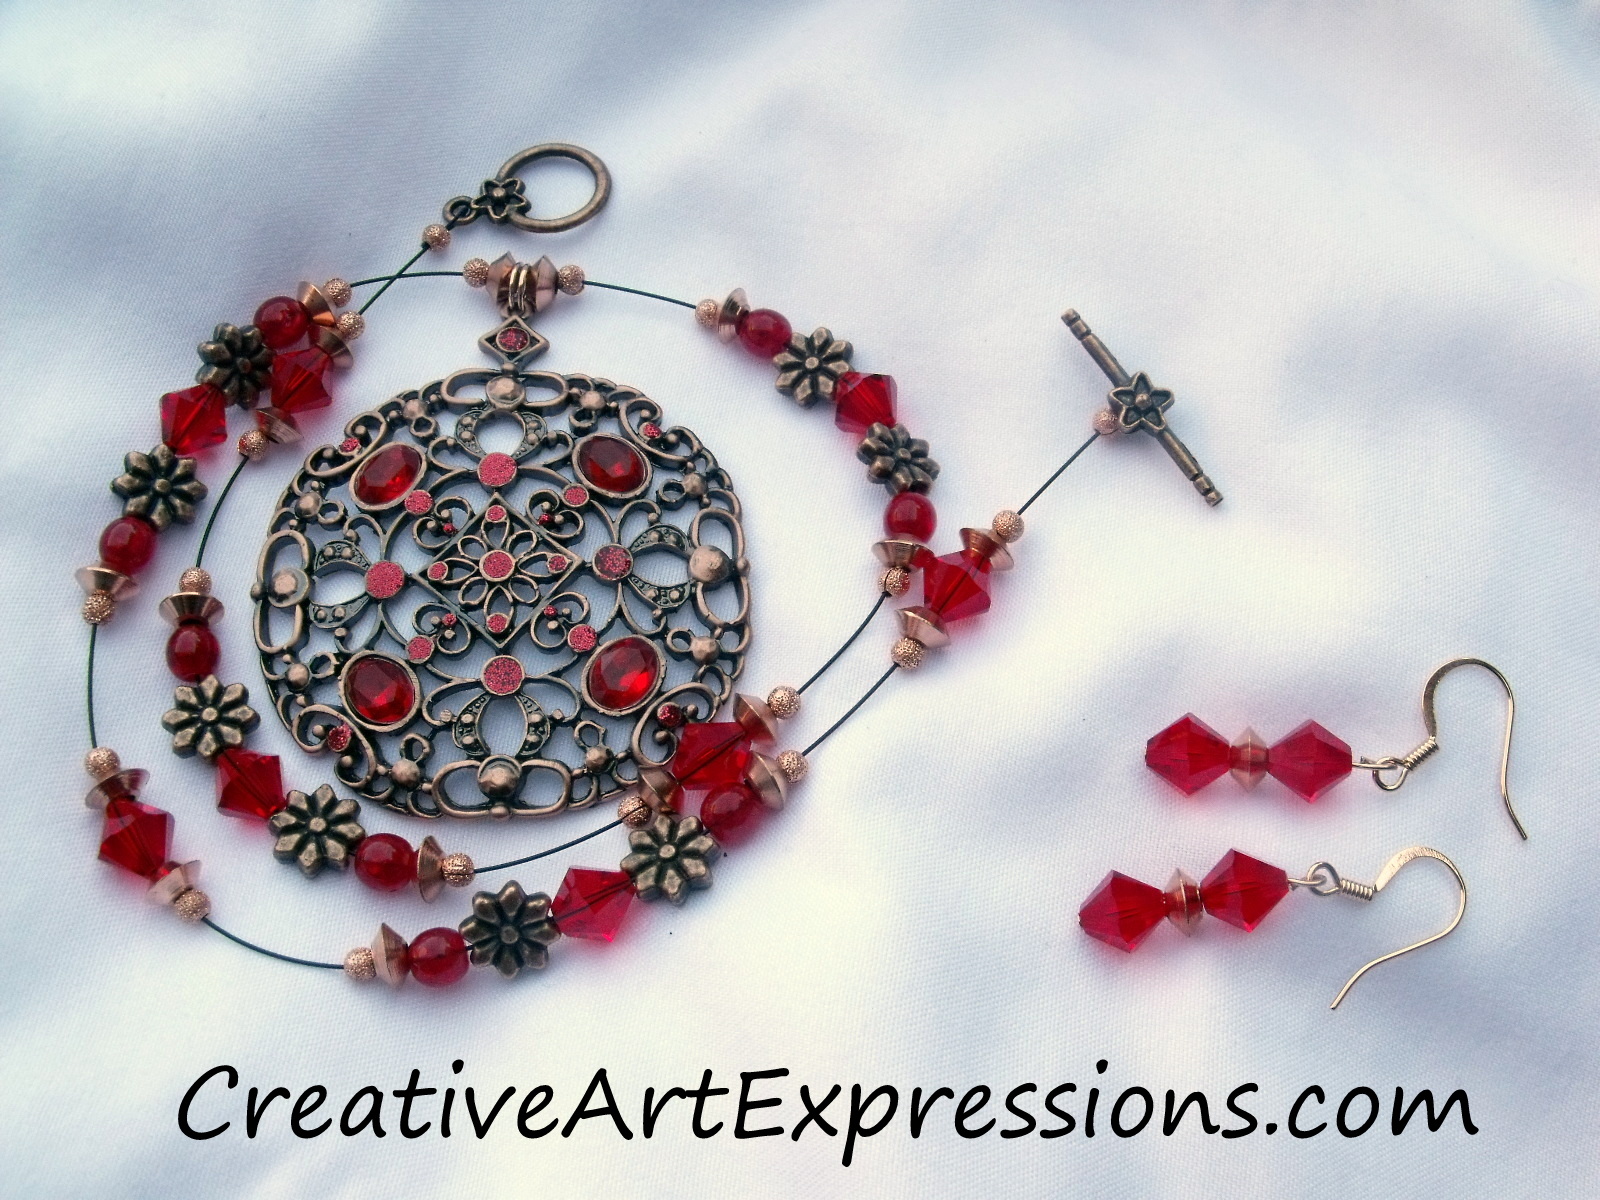 Creative Art Expressions Handmade Red & Antique Copper Necklace & Earring Set Jewerly Design